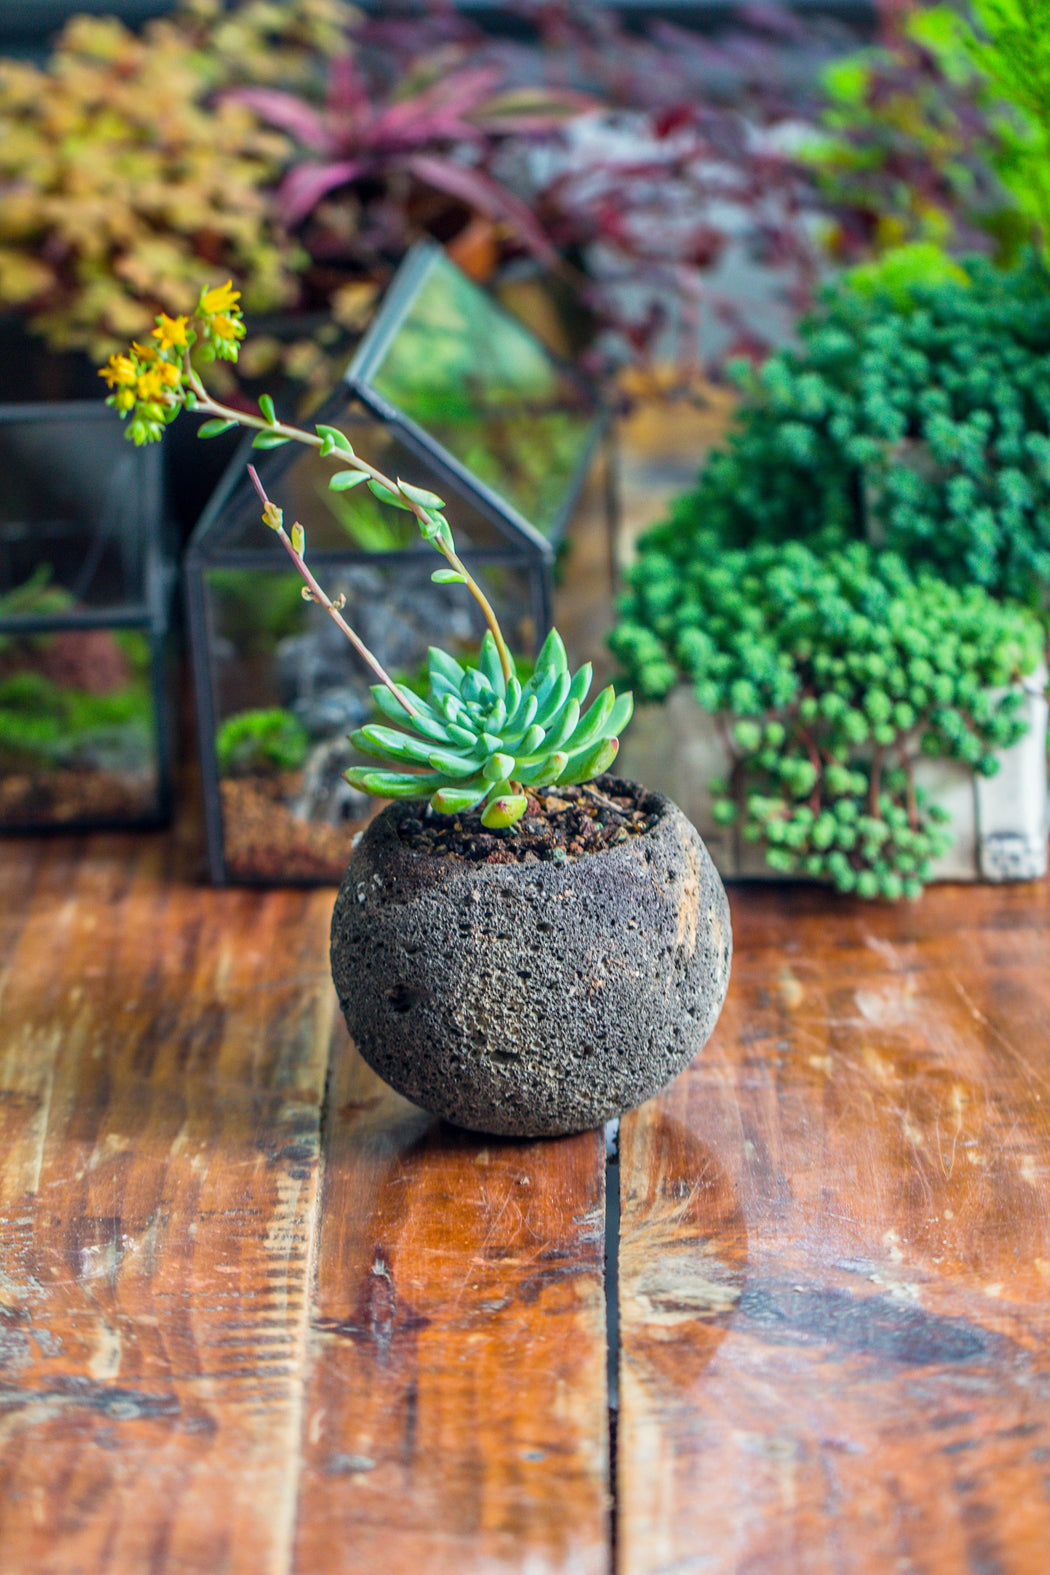 8cm / 3.1" Round Red Horticultural Lava Rock Volcanic Rock Planter for succulents, moss, tropical palants, terrariums - NCYPgarden